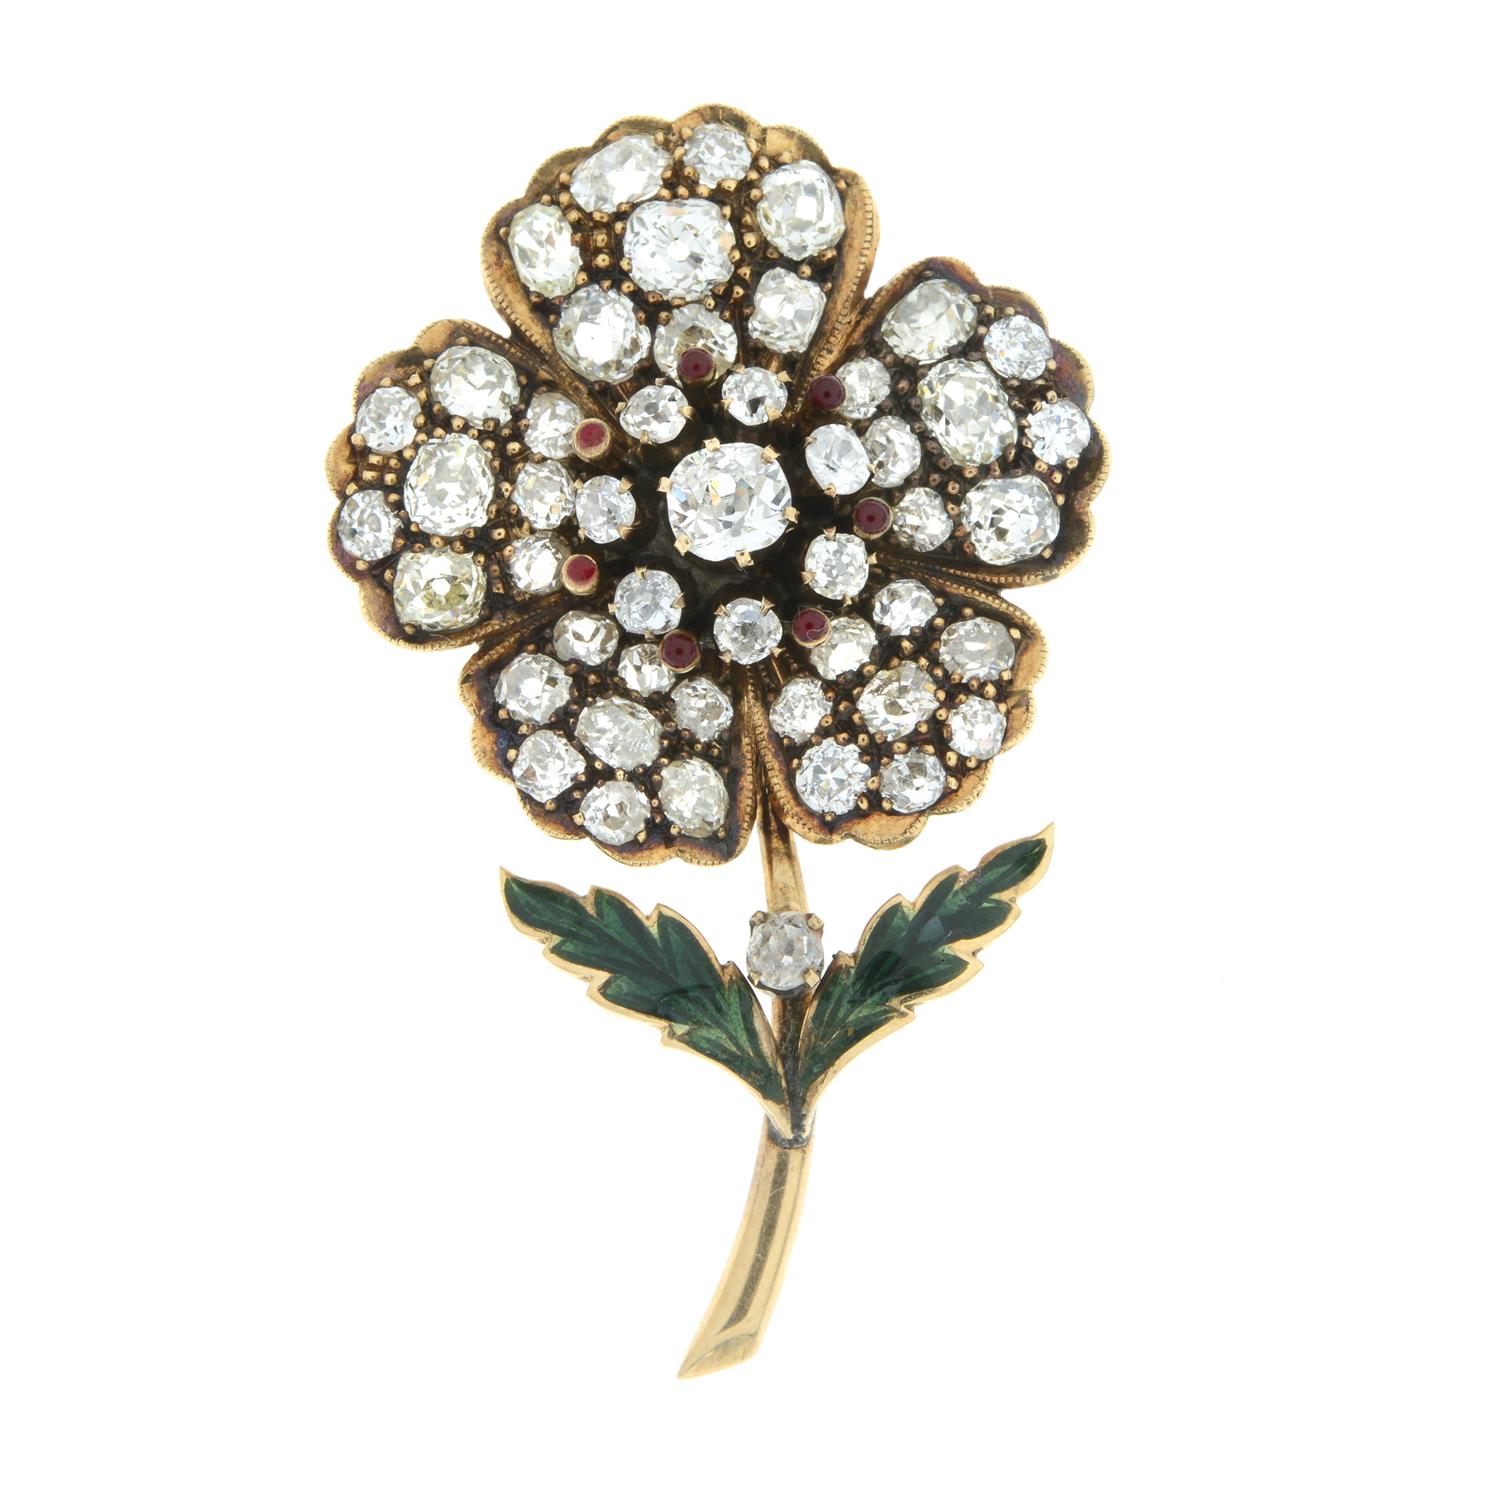 Late 19th century old-cut diamond and enamel floral brooch - Image 2 of 5